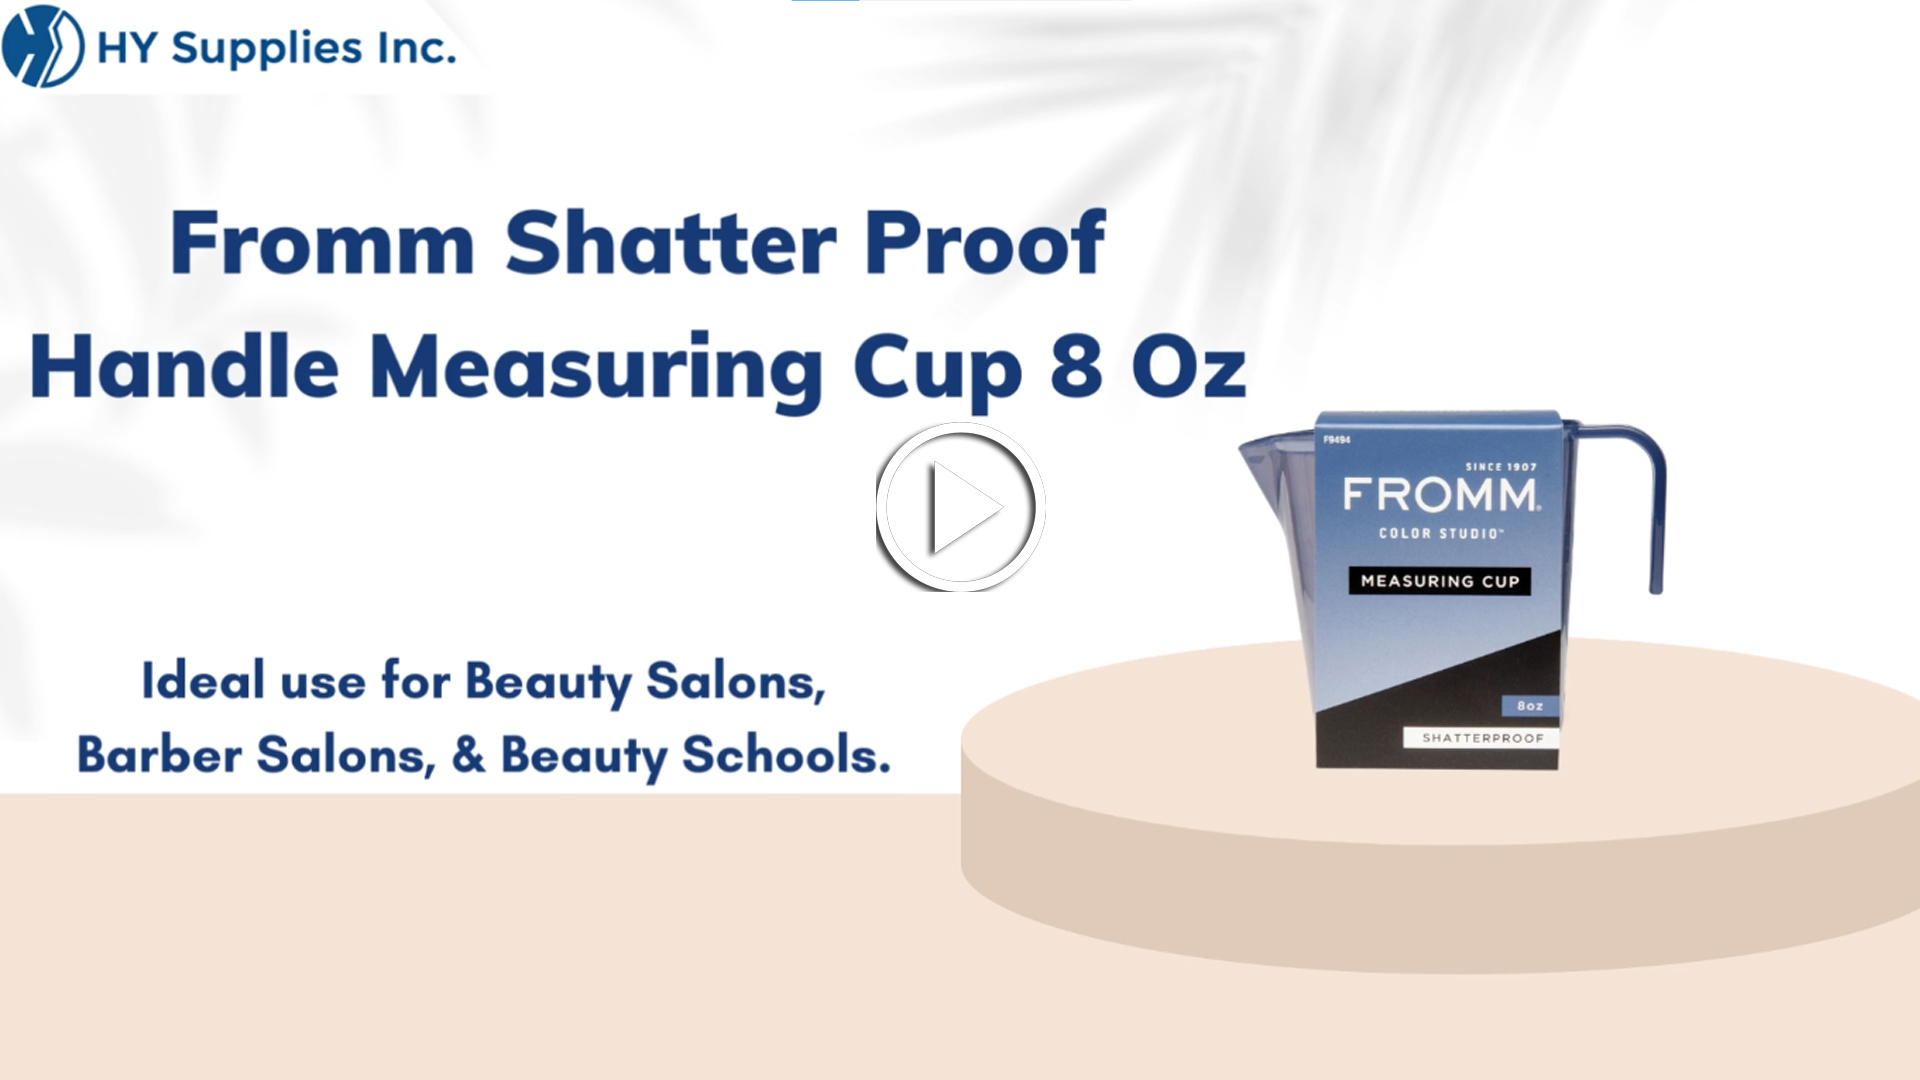 Fromm Shatter Proof Handle Measuring Cup 8 Oz